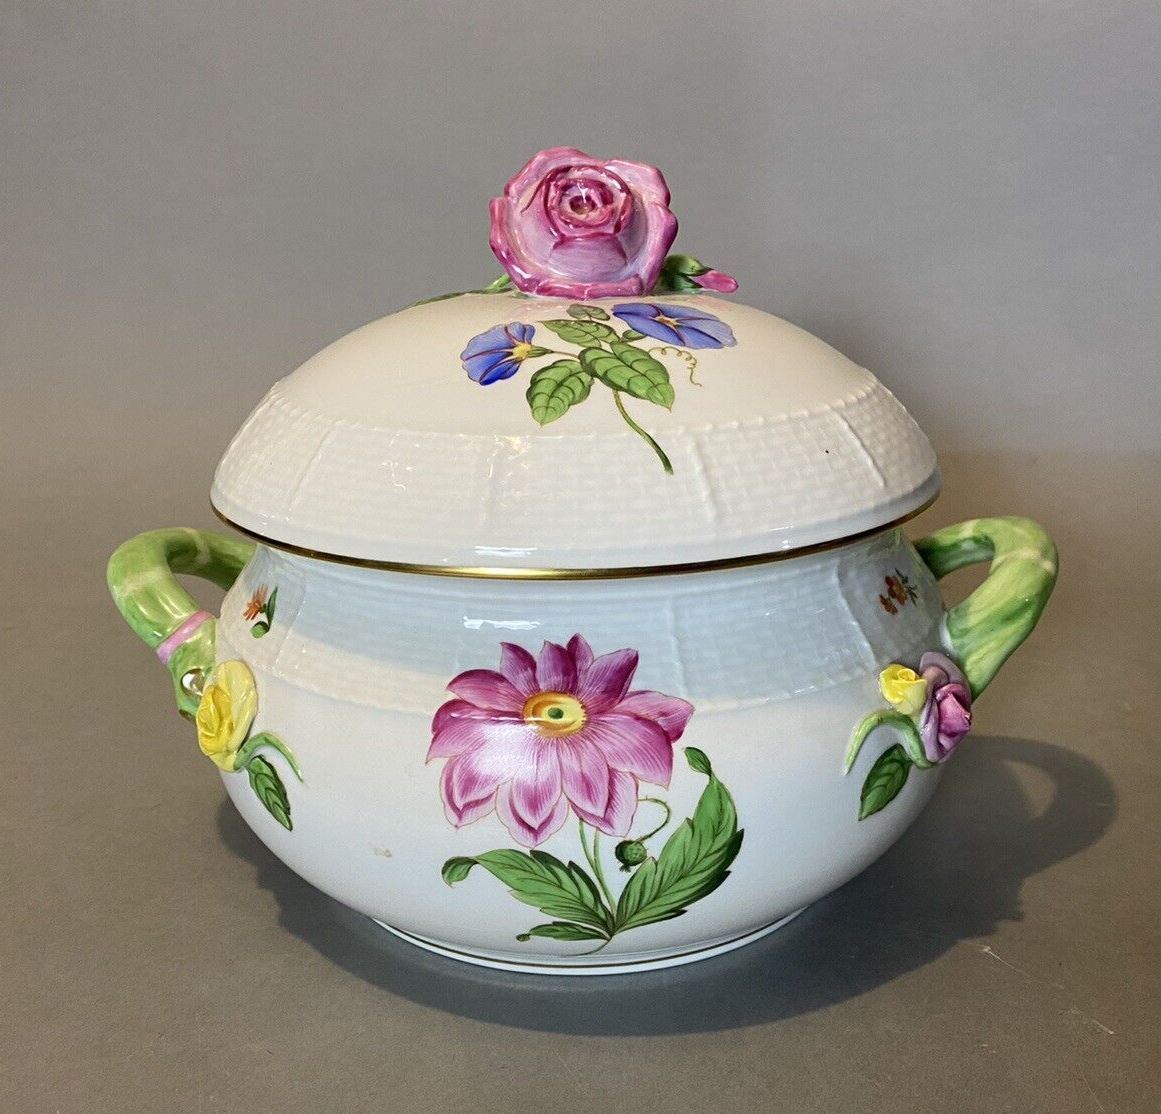 Herend Porcelain Floral Decorated Large Handled Tureen with Cover